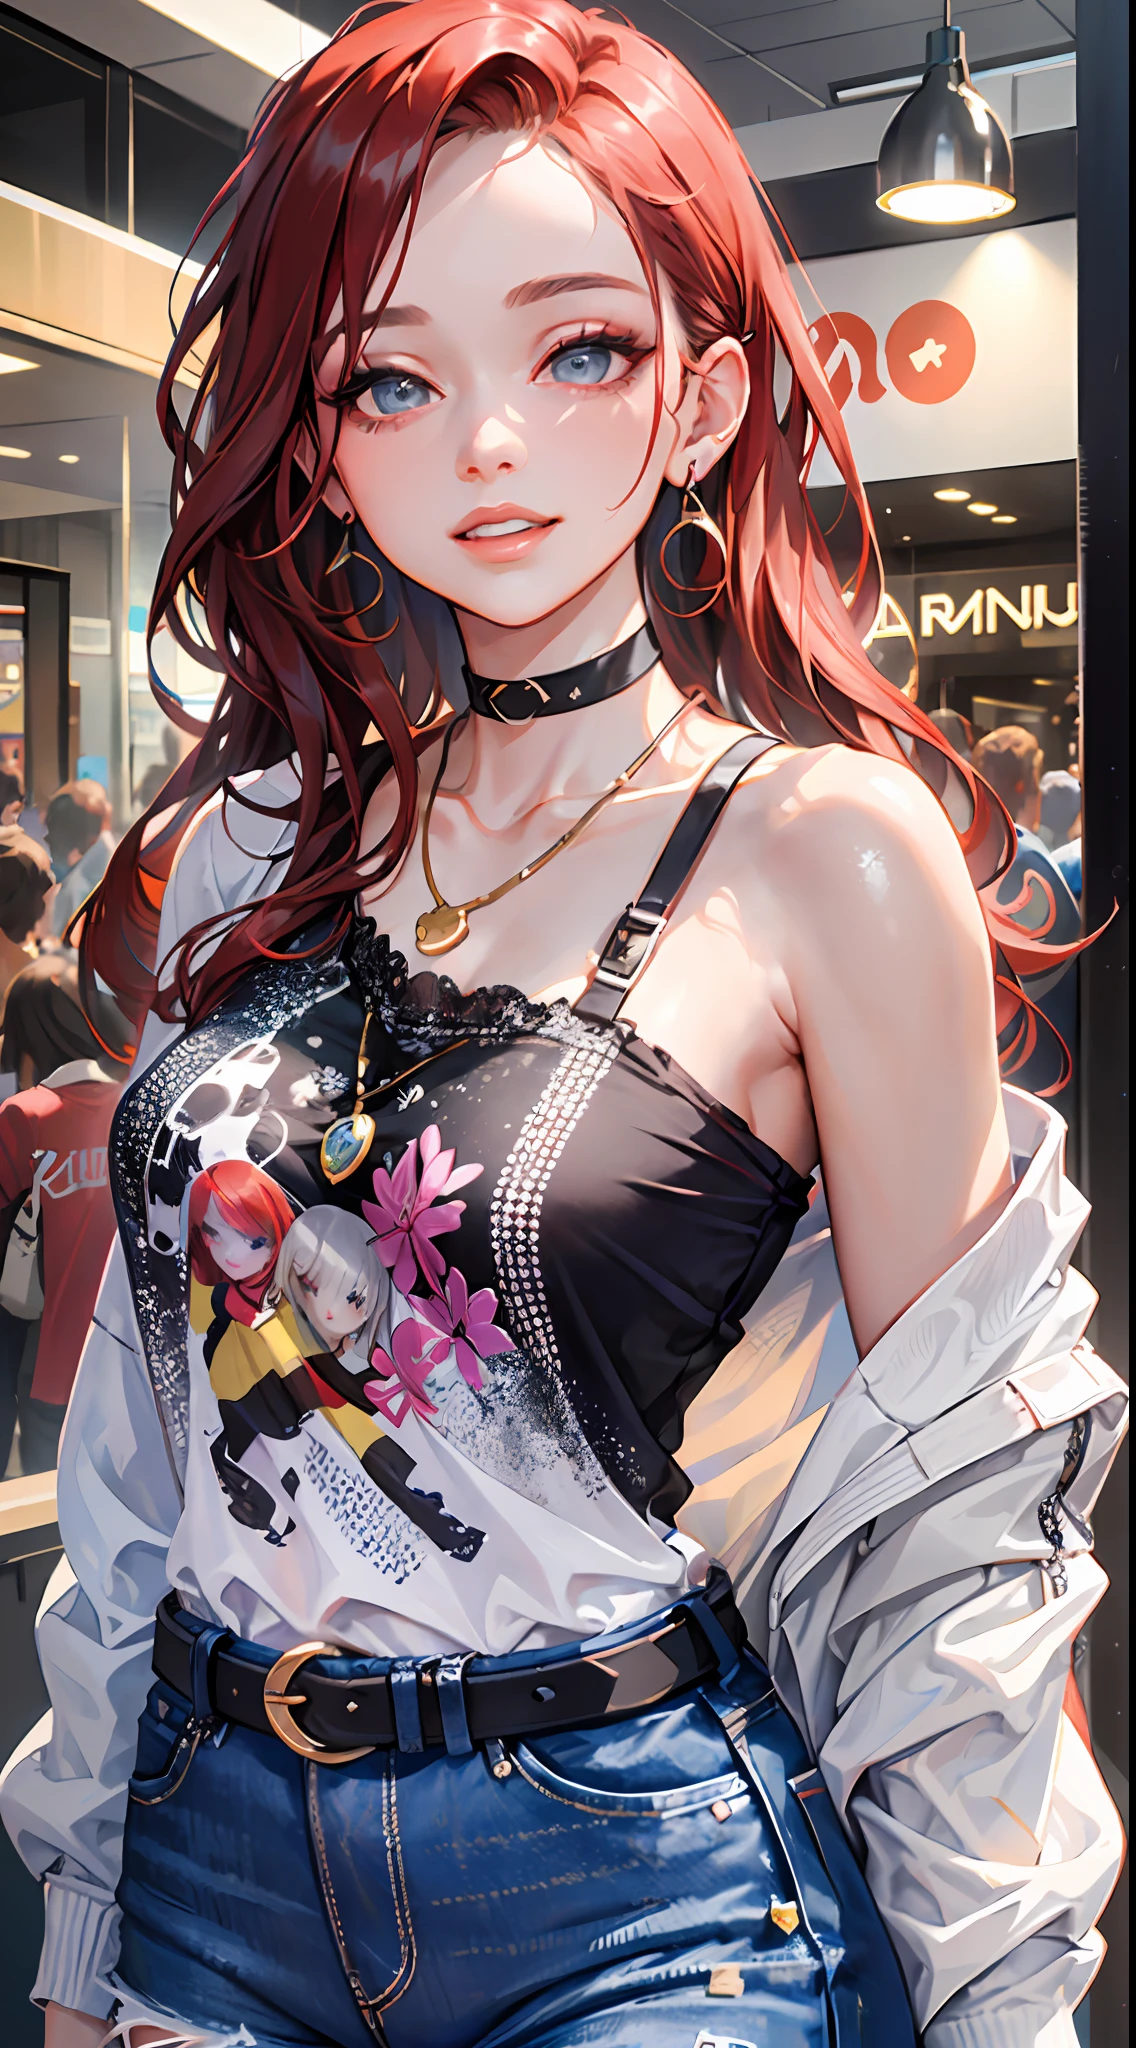 (masterpiece:1.2), (best quality:1.2), perfect eyes, perfect face, perfect lighting, 1girl, mature female, smiling, long red hair, straight hair, sophisticated haircut, stylish, single bare shoulder shirt long, music band print, jewelry, necklace, earrings, armlets, lacey choker, belt, low cut black jeans, thick eyelashes, makeup, eyeshadow, detailed mall background, crowd